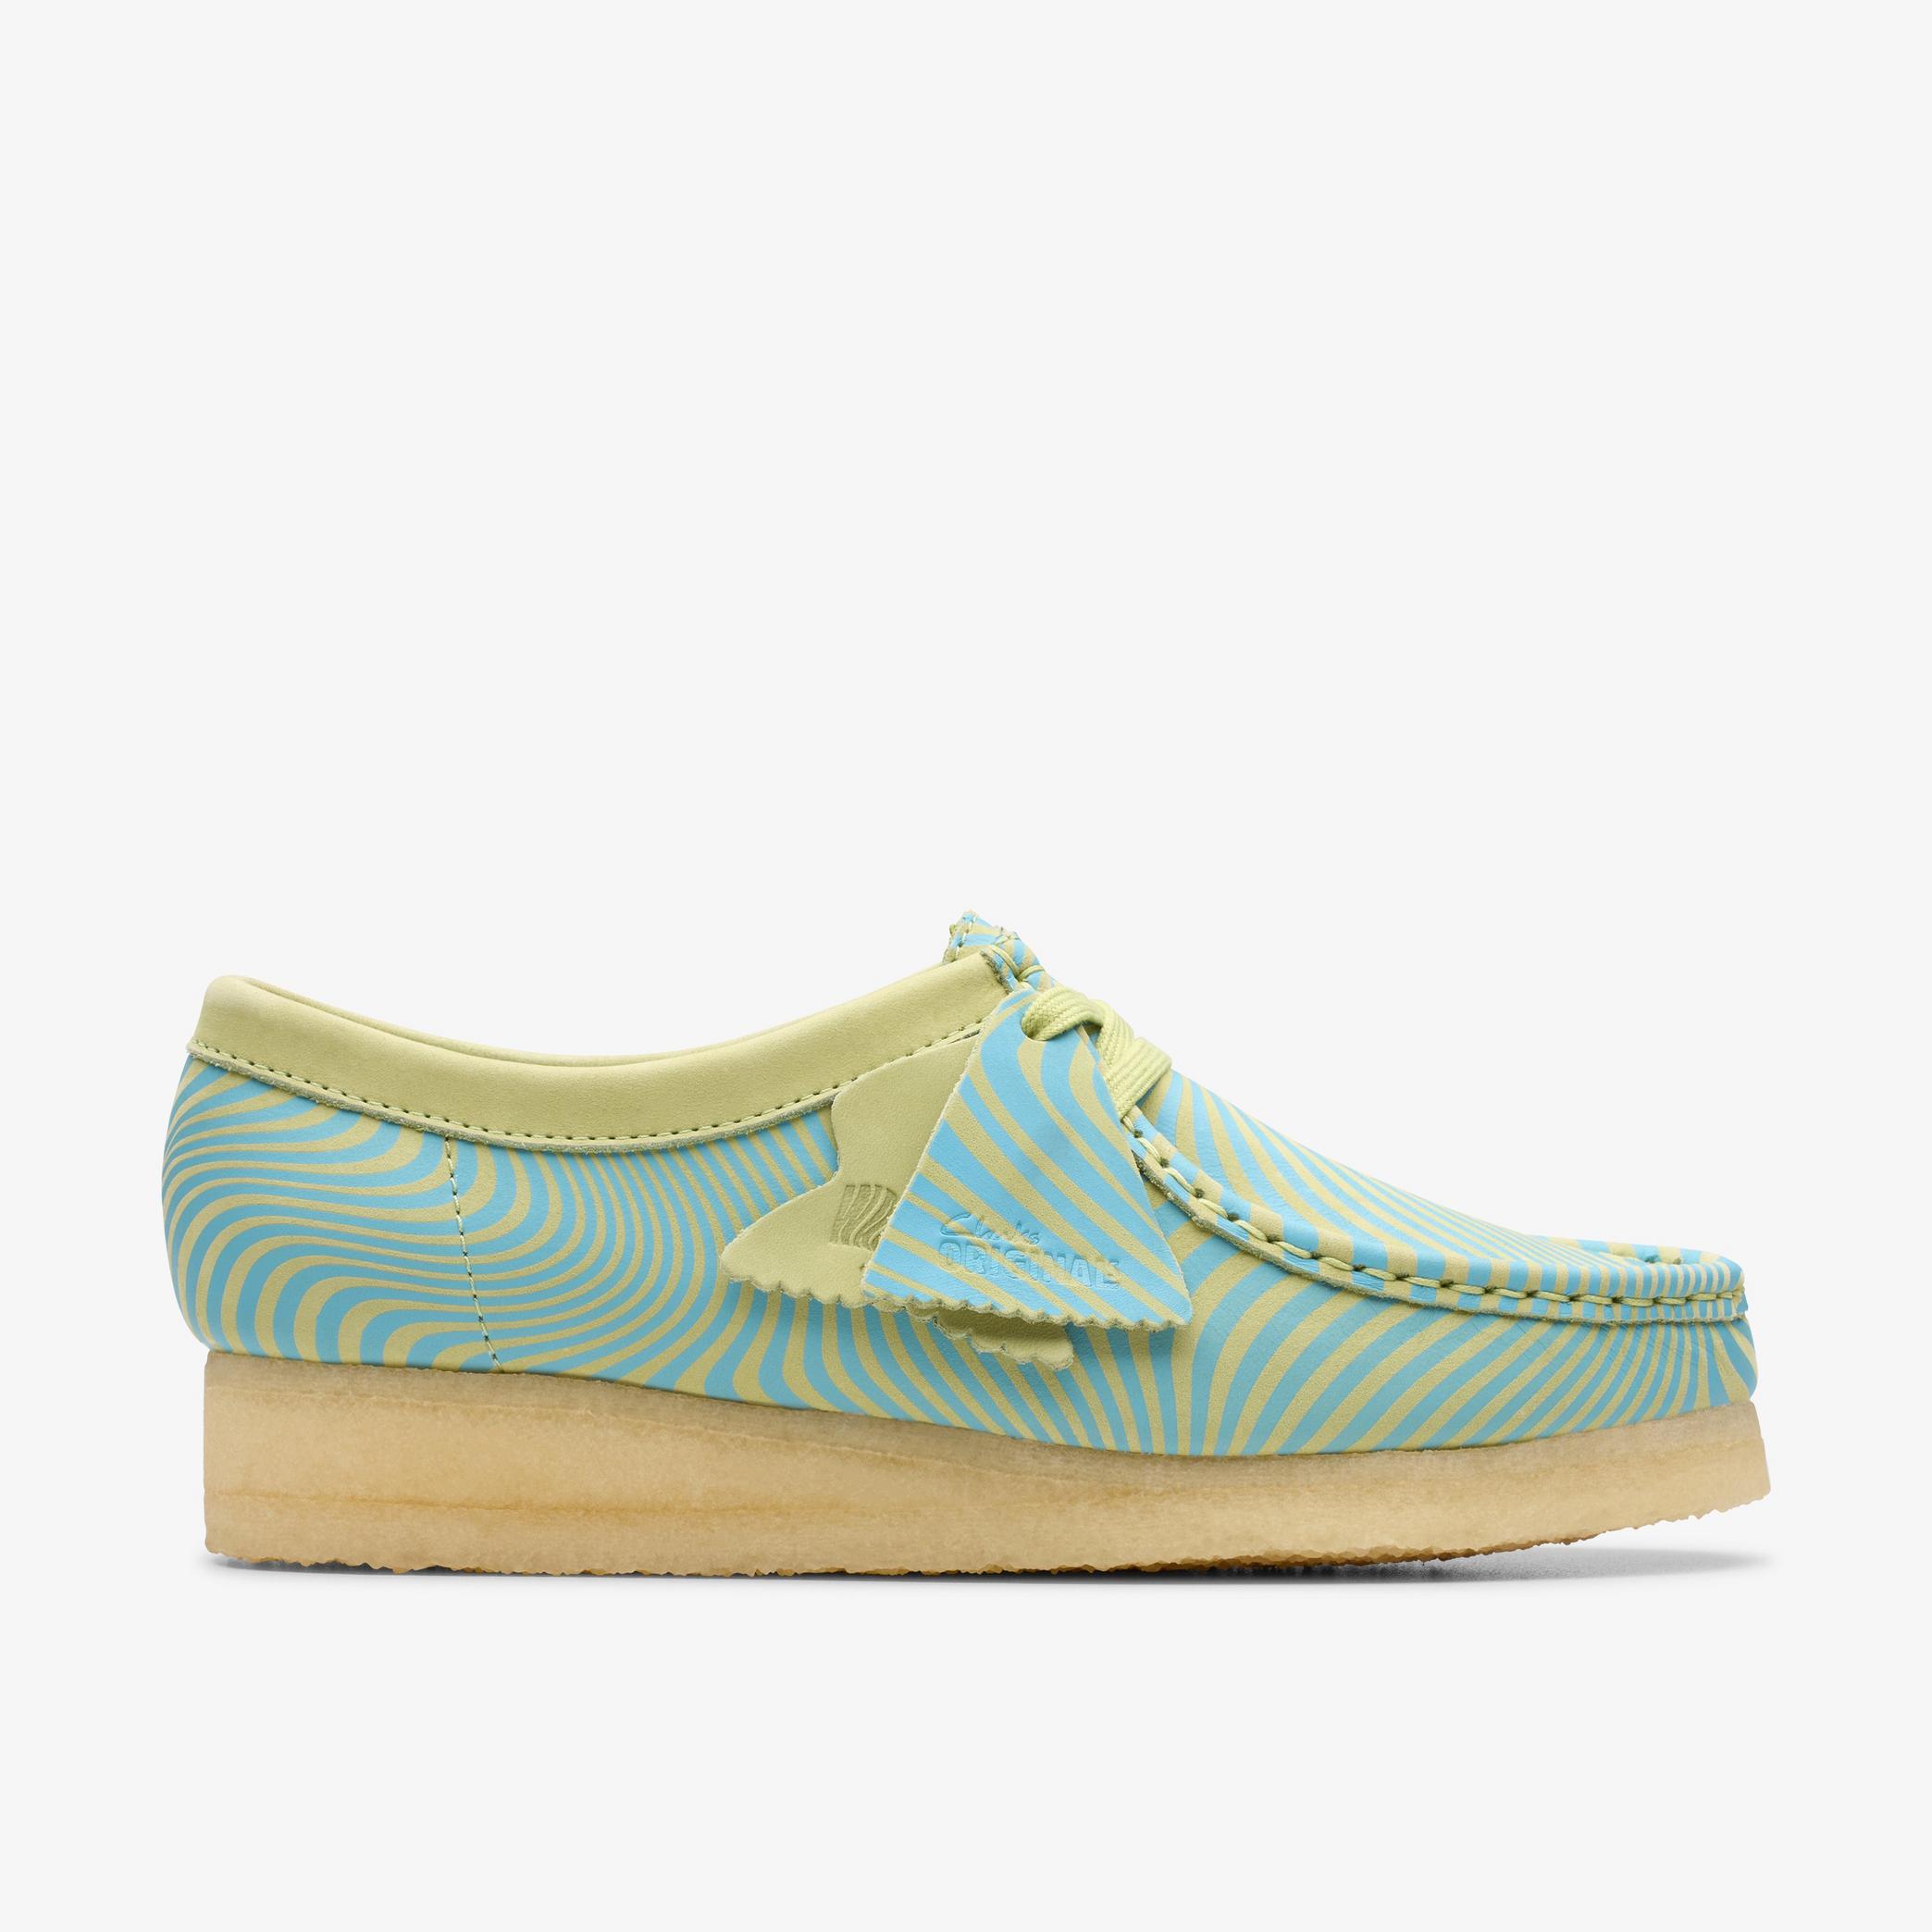 Wallabee Blue/Lime Print Wallabee, view 1 of 7